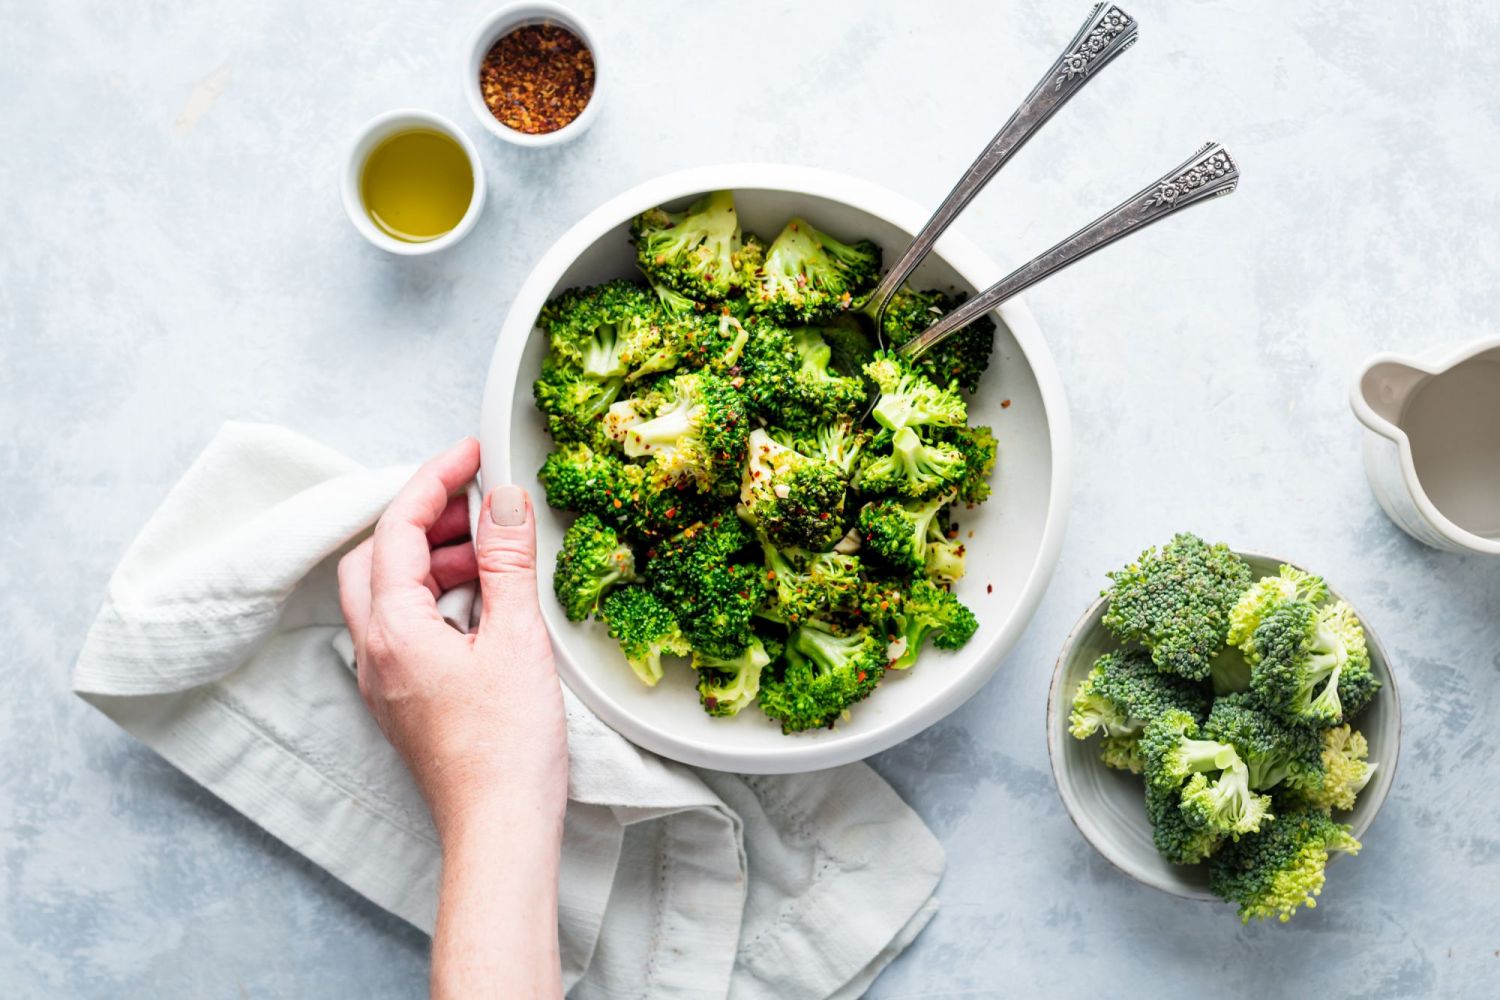 Garlic pan fried broccoli florets in a bowl wit salt, pepper, and red pepper flakes.